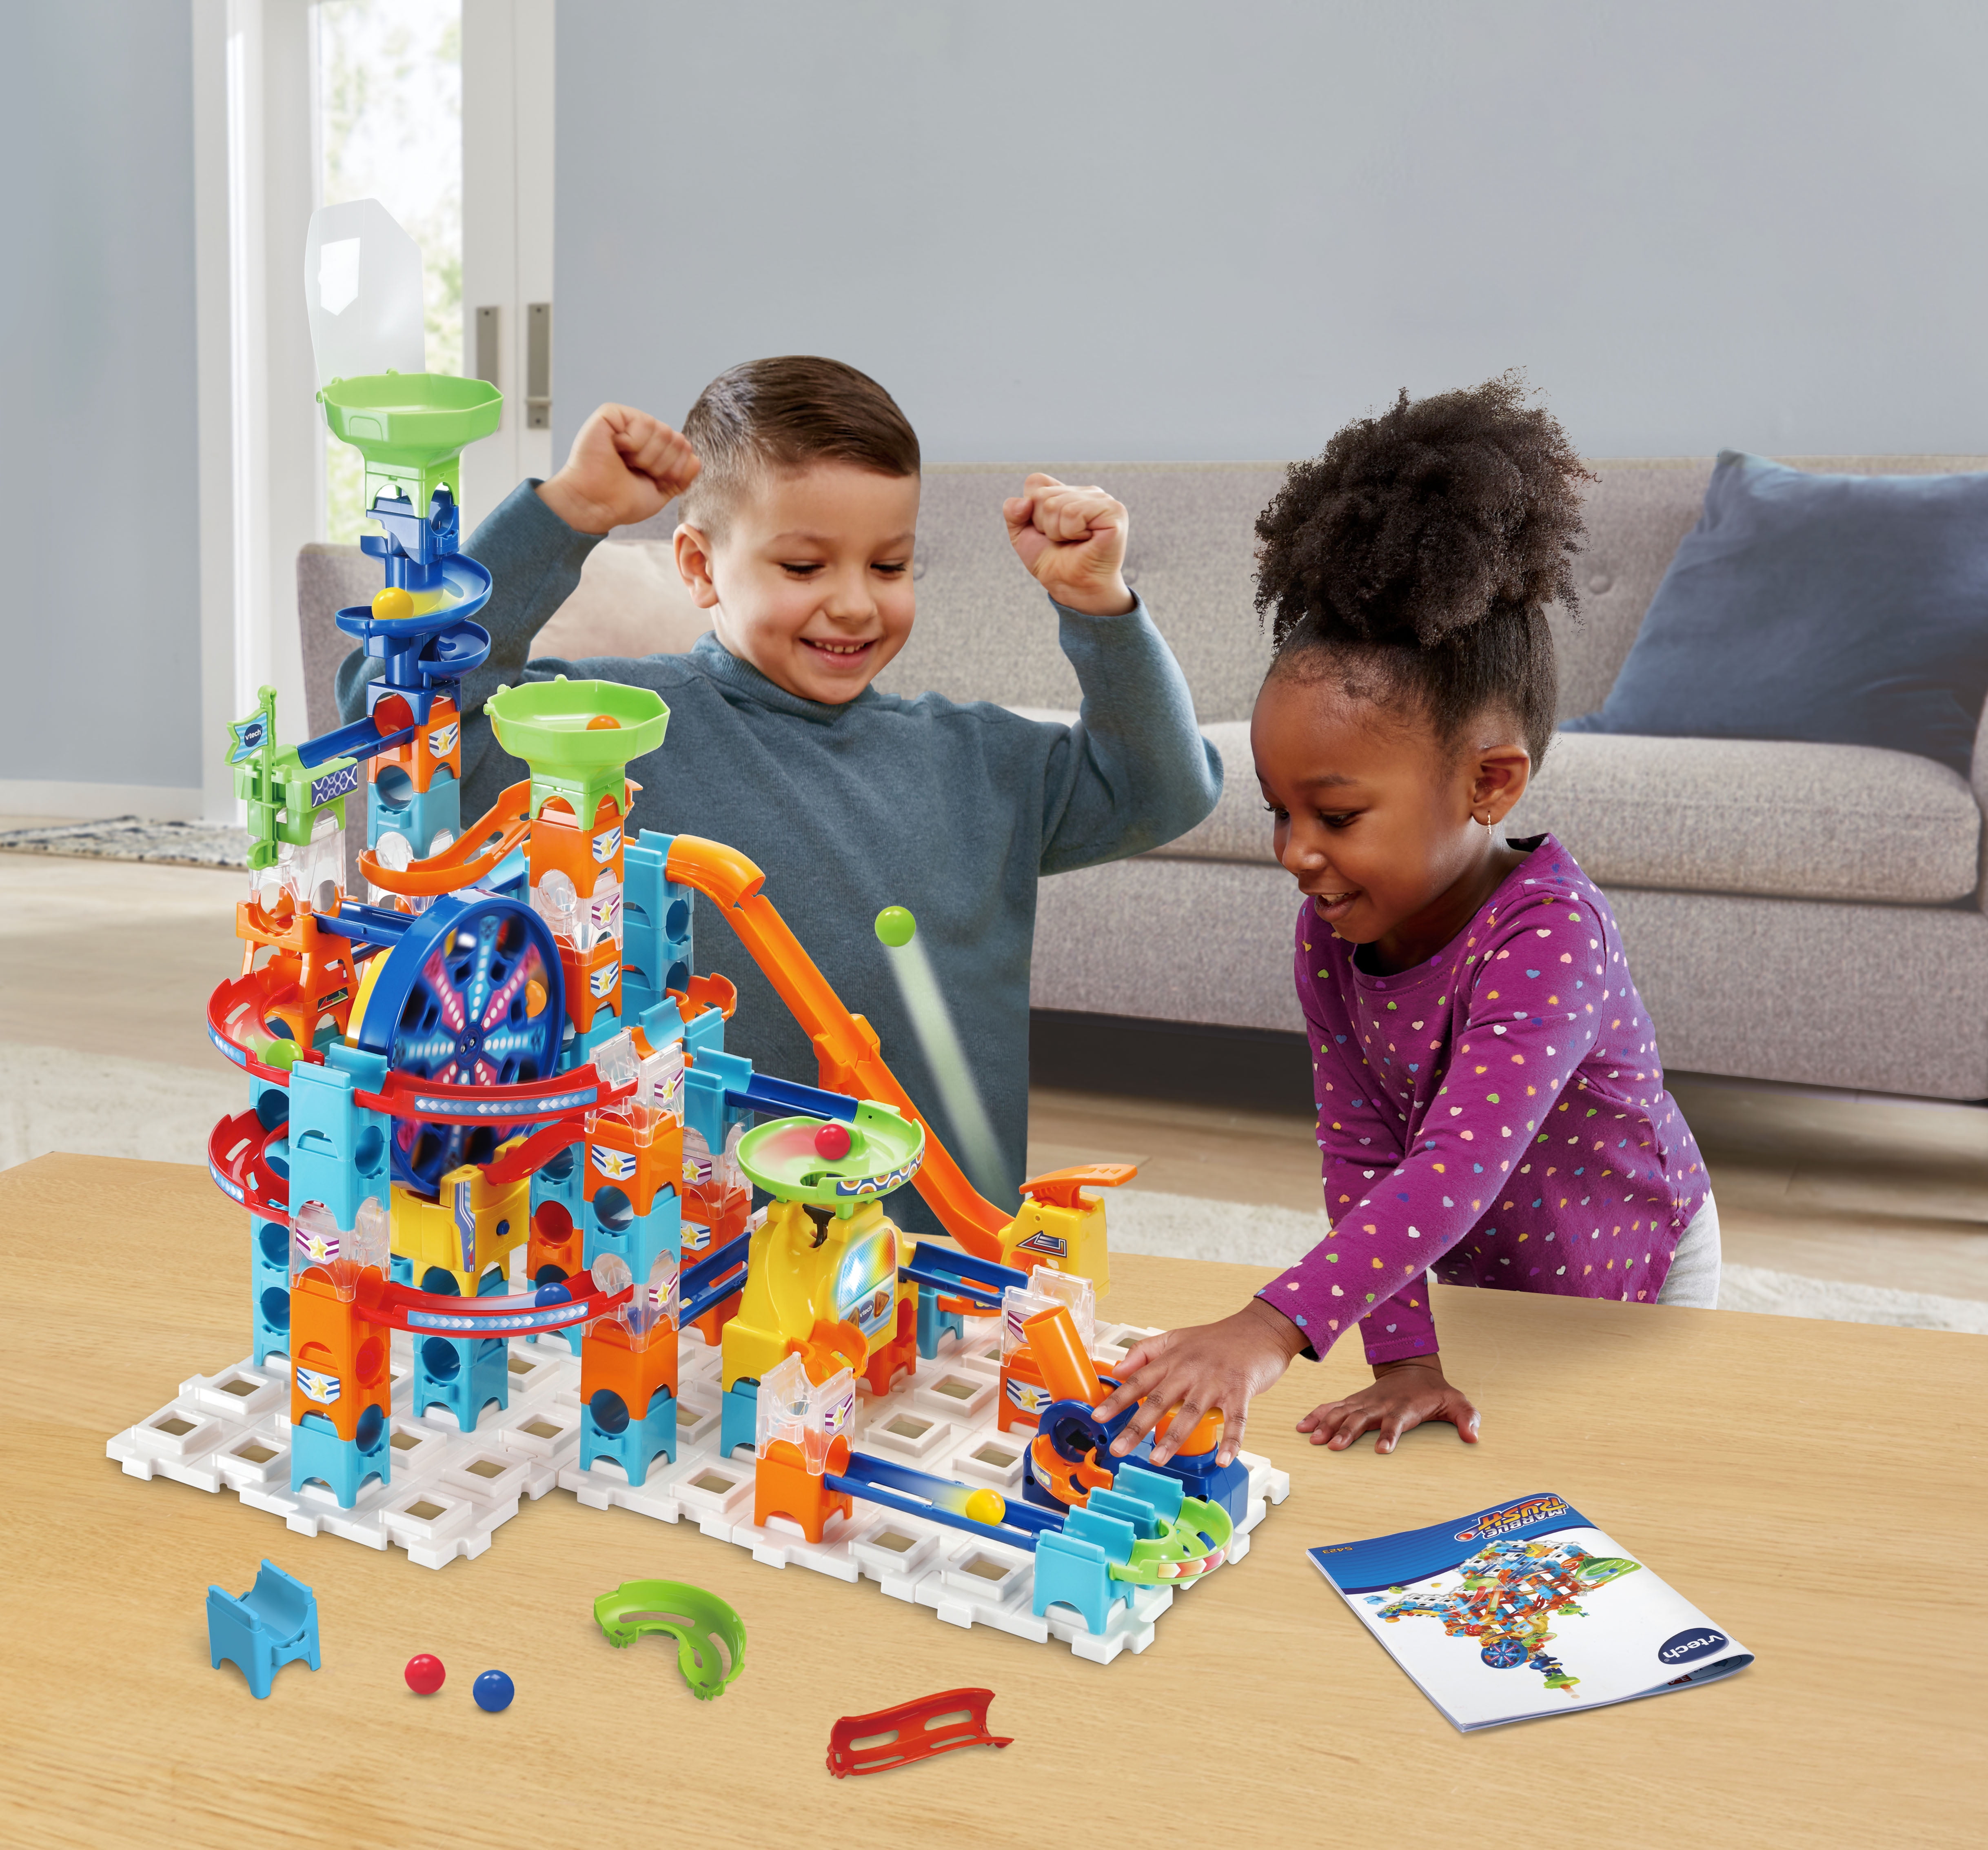 Fulfill Kids' Need for Speed with 2 New Marble Rush Sets - The Toy Insider